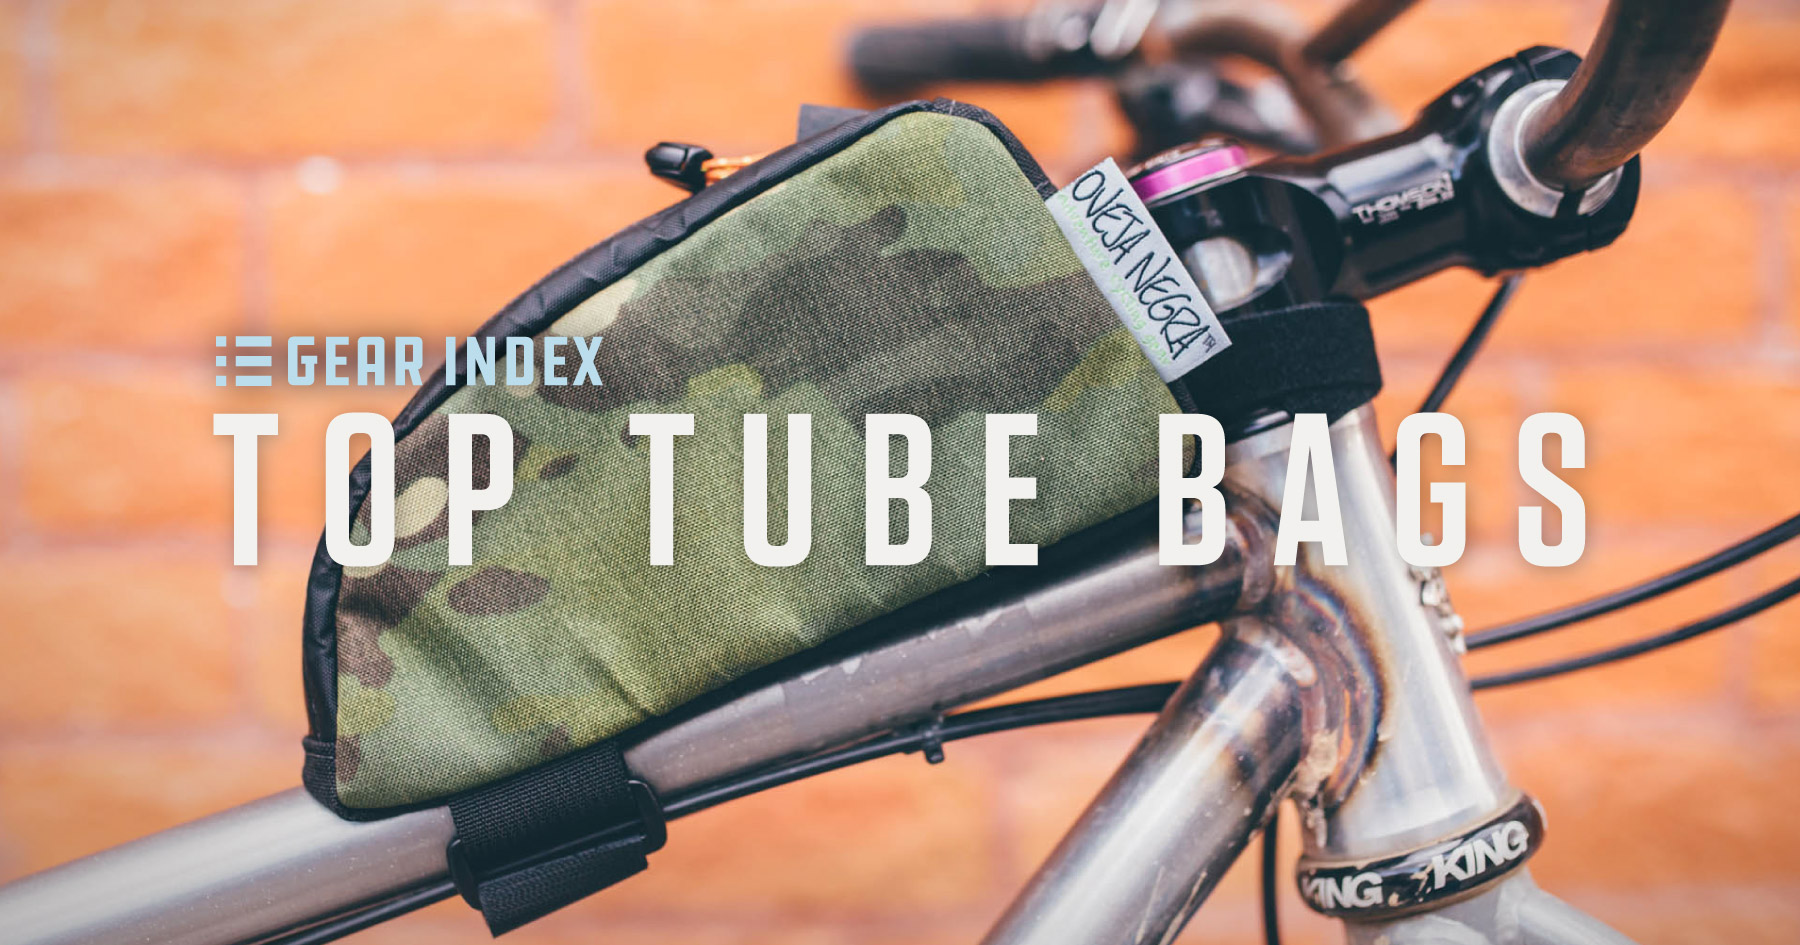 Bolt On Top Tube Bags Top Sellers, 54% OFF | www.ingeniovirtual.com